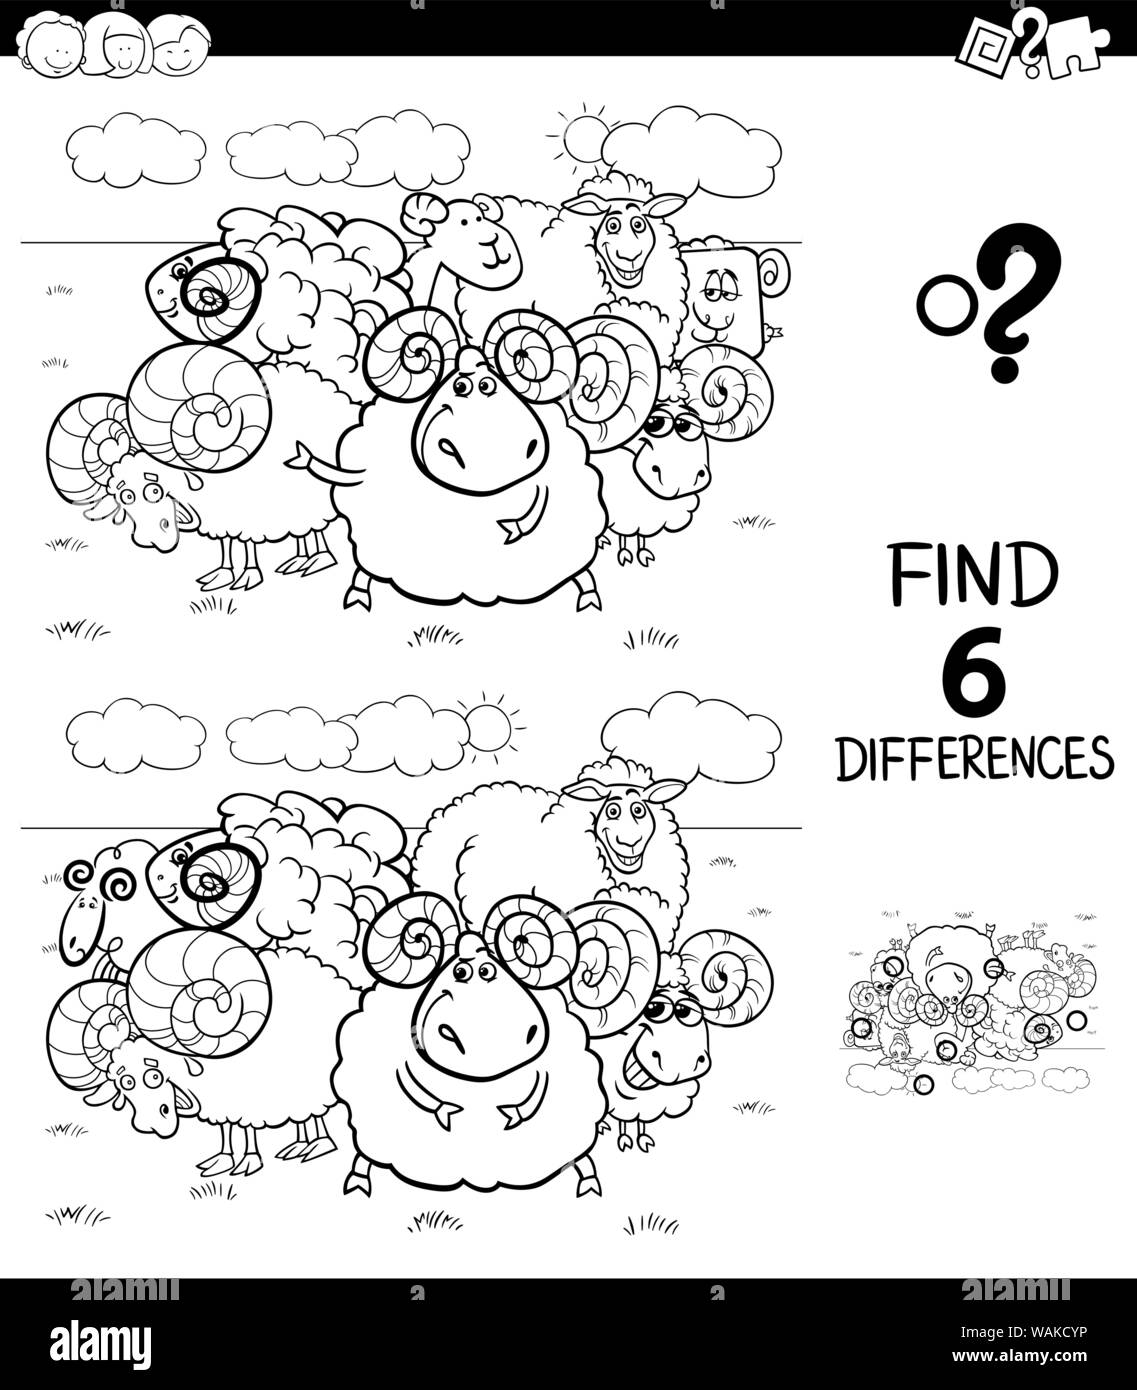 Black and White Cartoon Illustration of Finding Six Differences Between Pictures Educational Game for Children with Sheep and Rams Animal Characters C Stock Vector